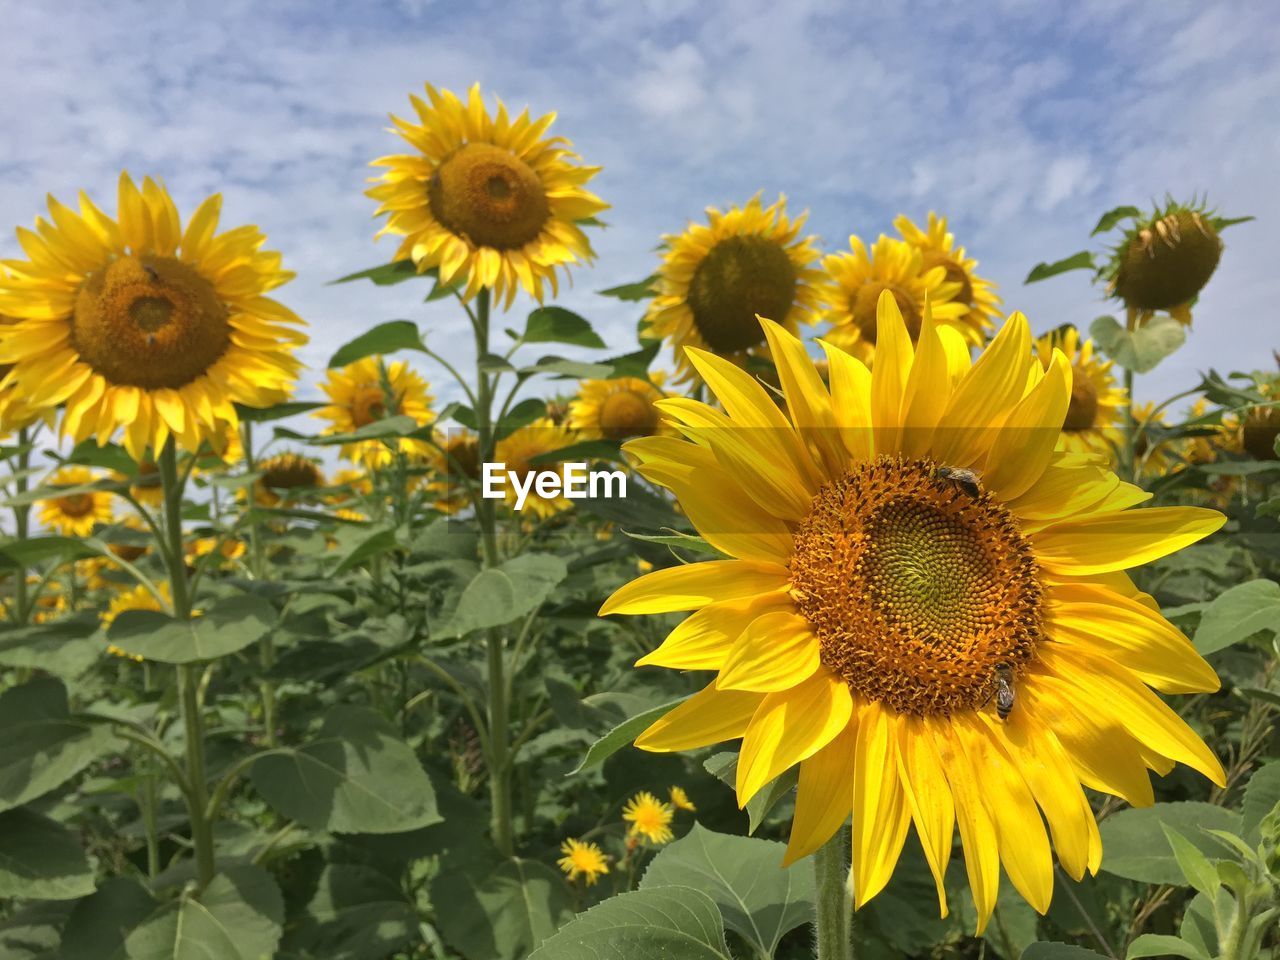 Close-up of sunflowers on flowering plant